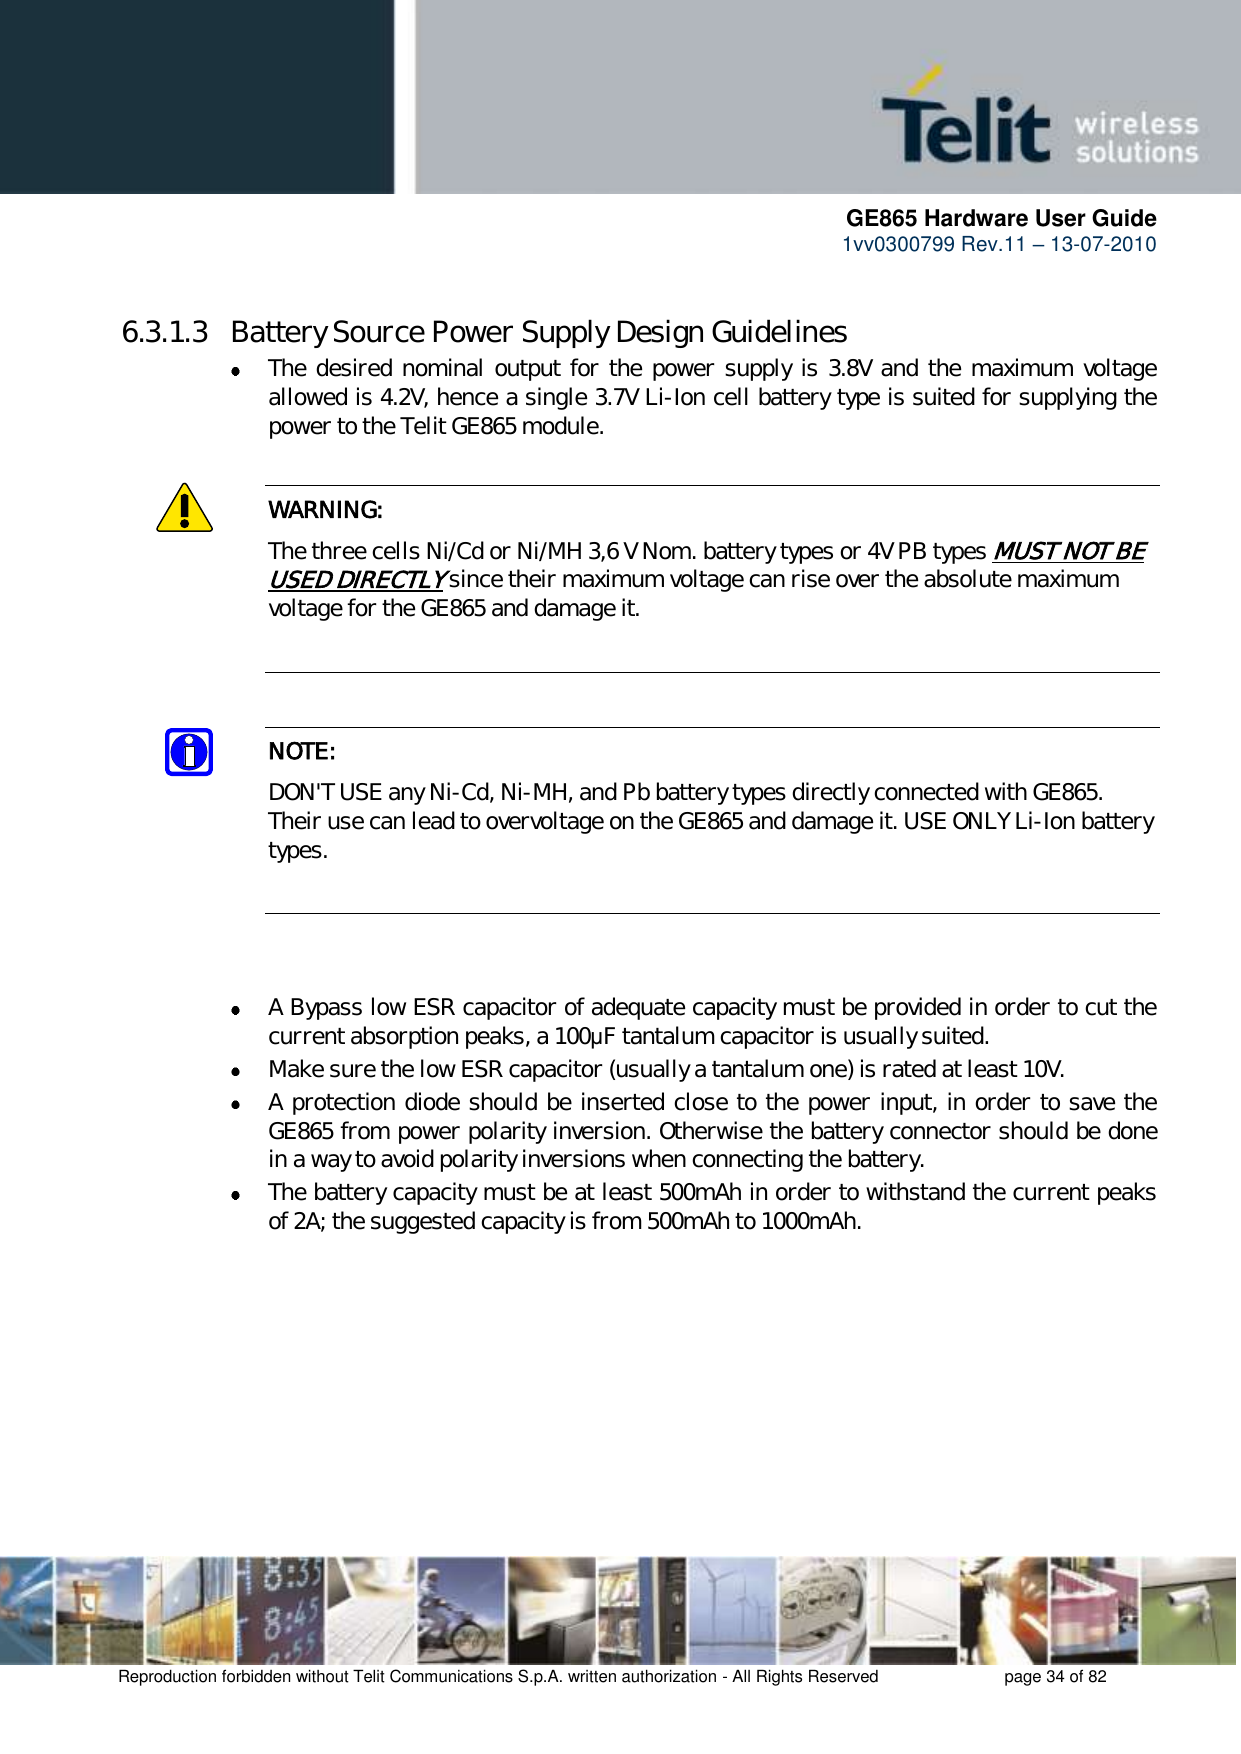      GE865 Hardware User Guide 1vv0300799 Rev.11 – 13-07-2010       Reproduction forbidden without Telit Communications S.p.A. written authorization - All Rights Reserved    page 34 of 82   6.3.1.3  Battery Source Power Supply Design Guidelines  The desired nominal output for the power supply is 3.8V and the maximum voltage allowed is 4.2V, hence a single 3.7V Li-Ion cell battery type is suited for supplying the power to the Telit GE865 module.  WARNING: The three cells Ni/Cd or Ni/MH 3,6 V Nom. battery types or 4V PB types MUST NOT BE USED DIRECTLY since their maximum voltage can rise over the absolute maximum voltage for the GE865 and damage it.   NOTE: DON&apos;T USE any Ni-Cd, Ni-MH, and Pb battery types directly connected with GE865. Their use can lead to overvoltage on the GE865 and damage it. USE ONLY Li-Ion battery types.     A Bypass low ESR capacitor of adequate capacity must be provided in order to cut the current absorption peaks, a 100μF tantalum capacitor is usually suited.  Make sure the low ESR capacitor (usually a tantalum one) is rated at least 10V.  A protection diode should be inserted close to the power input, in order to save the GE865 from power polarity inversion. Otherwise the battery connector should be done in a way to avoid polarity inversions when connecting the battery.  The battery capacity must be at least 500mAh in order to withstand the current peaks of 2A; the suggested capacity is from 500mAh to 1000mAh. 